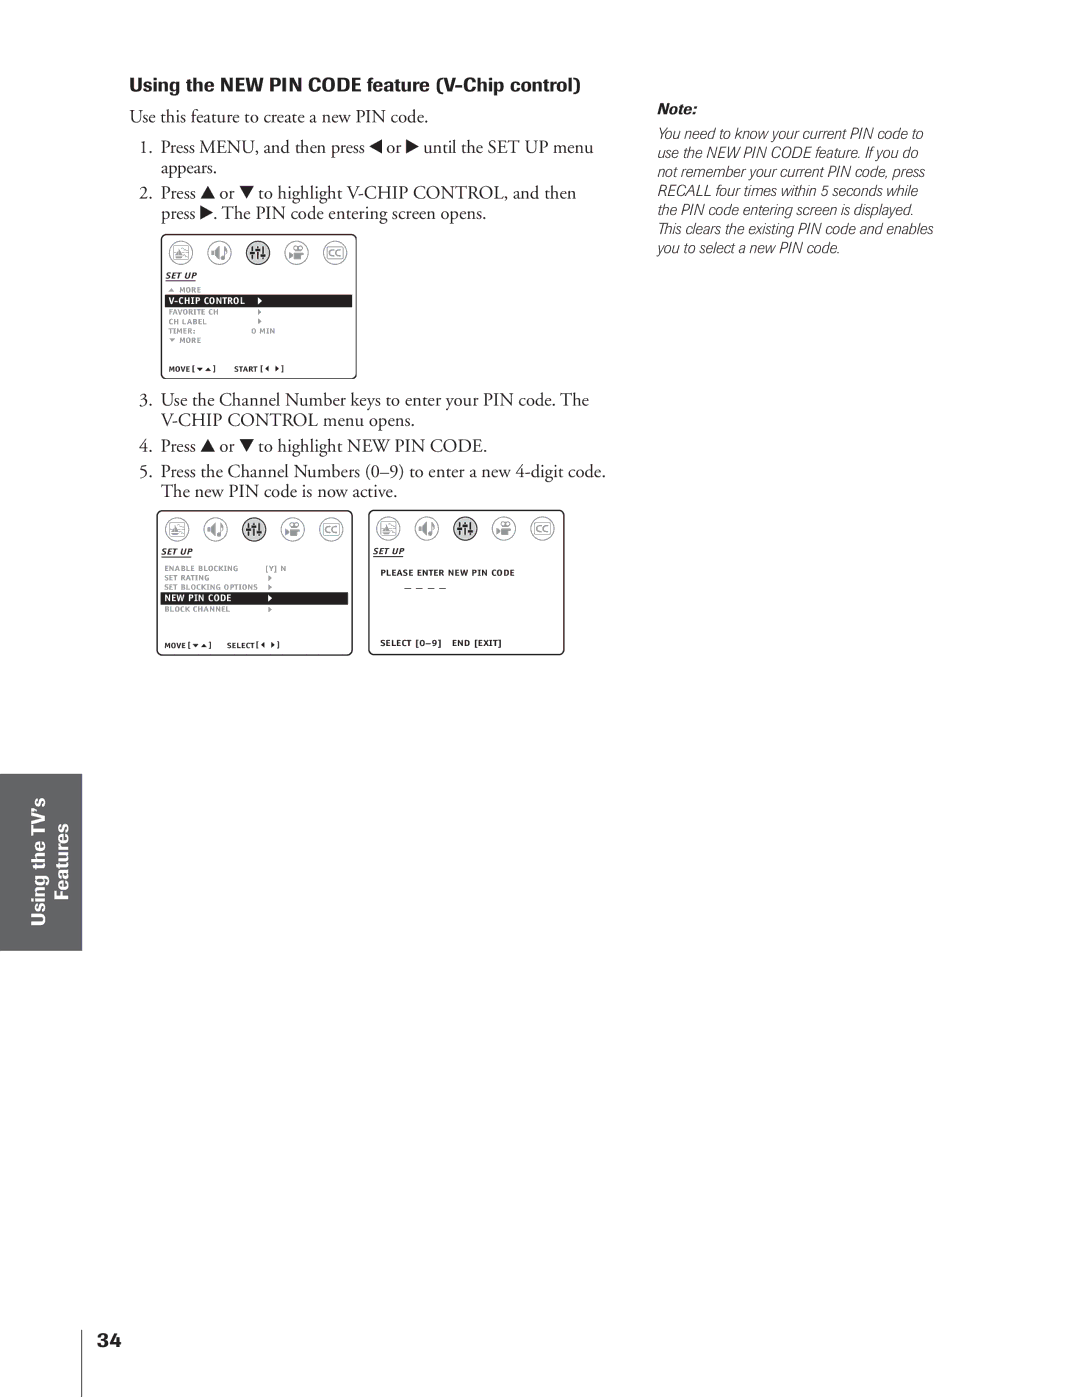 Toshiba 32AF14 owner manual Using the NEW PIN Code feature V-Chip control, Features 